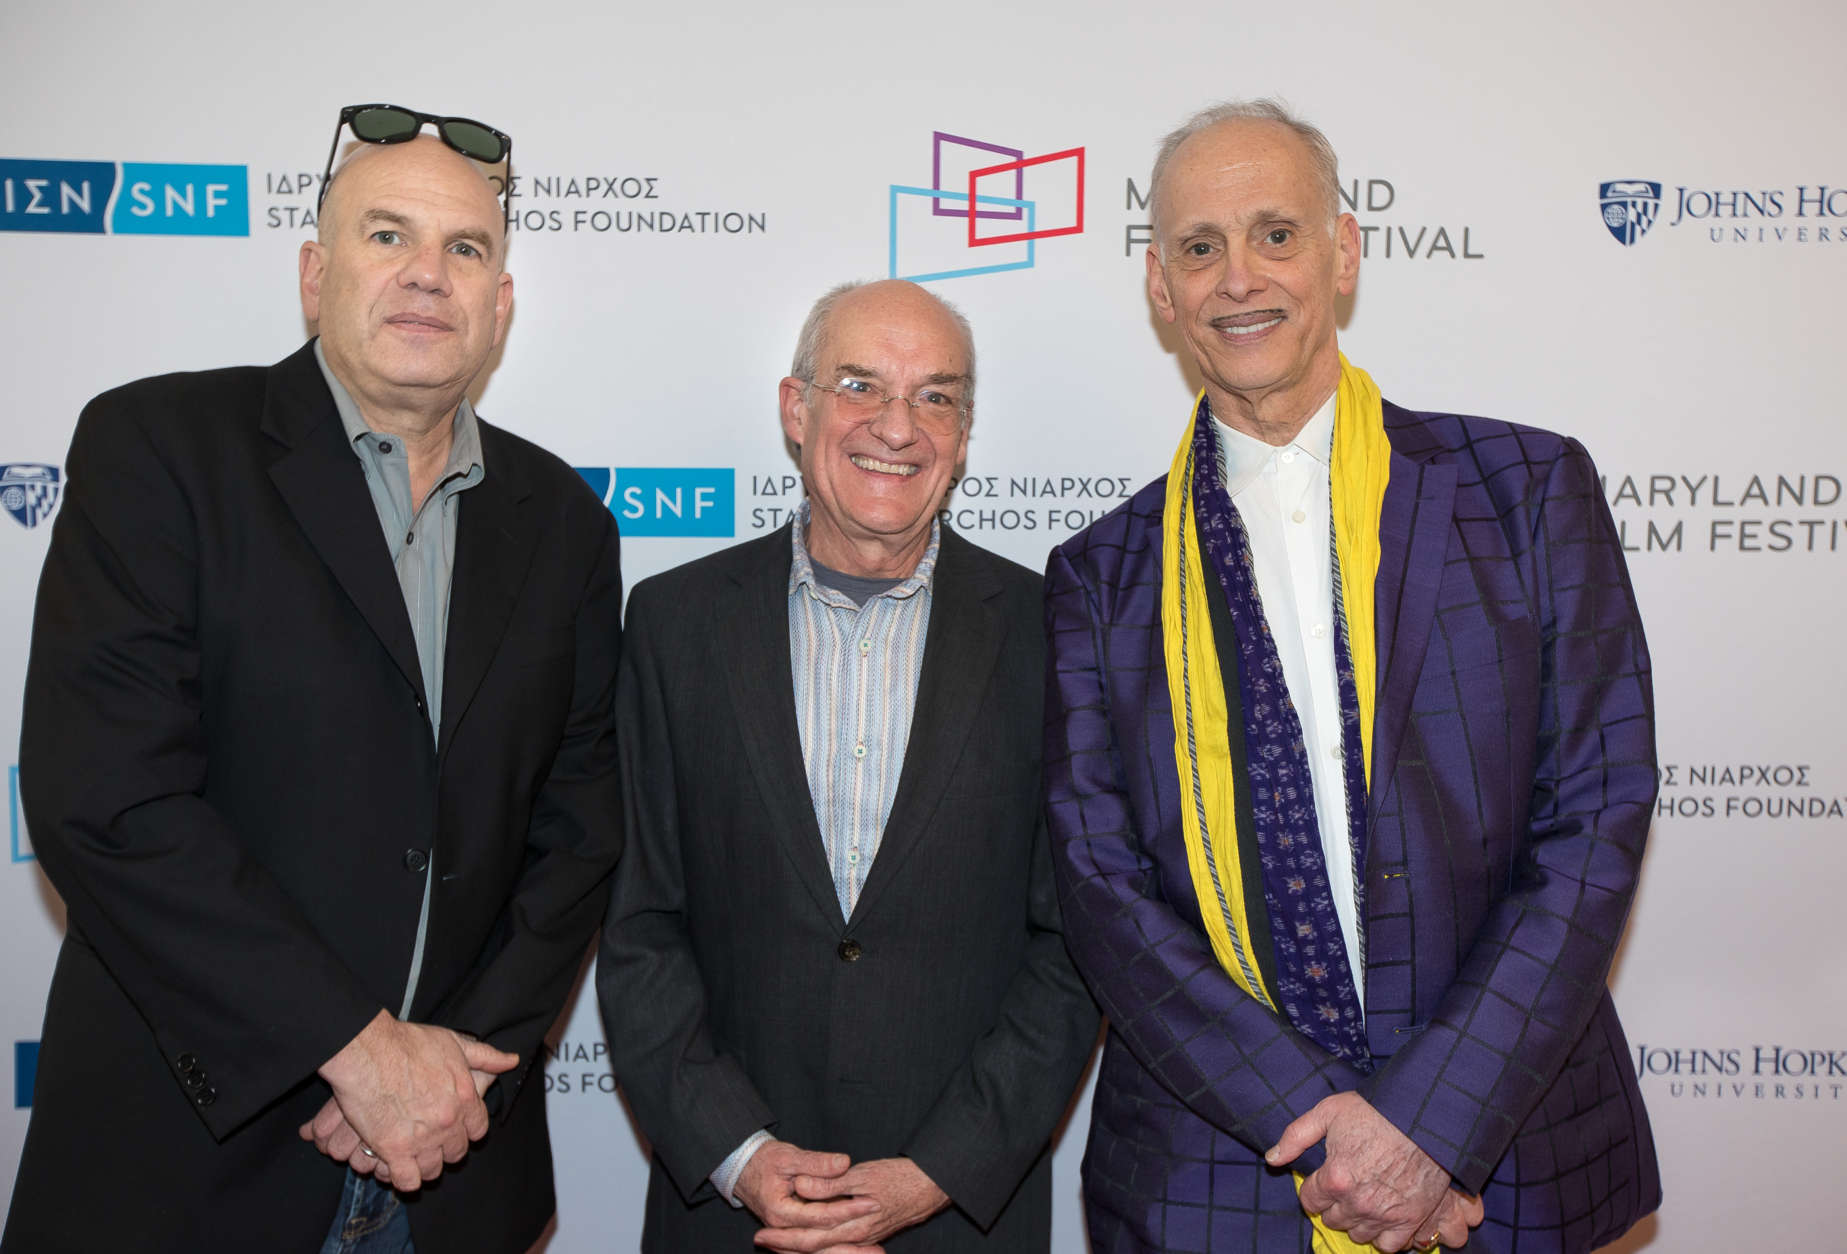 Maryland Film Festival director Jed Dietz (center) appears with filmmakers David Simon (left) and John Waters (right) at the April 20 unveiling of the restored Parkway Theatre in Baltimore. (Chelsea Clough, Abel Communications)